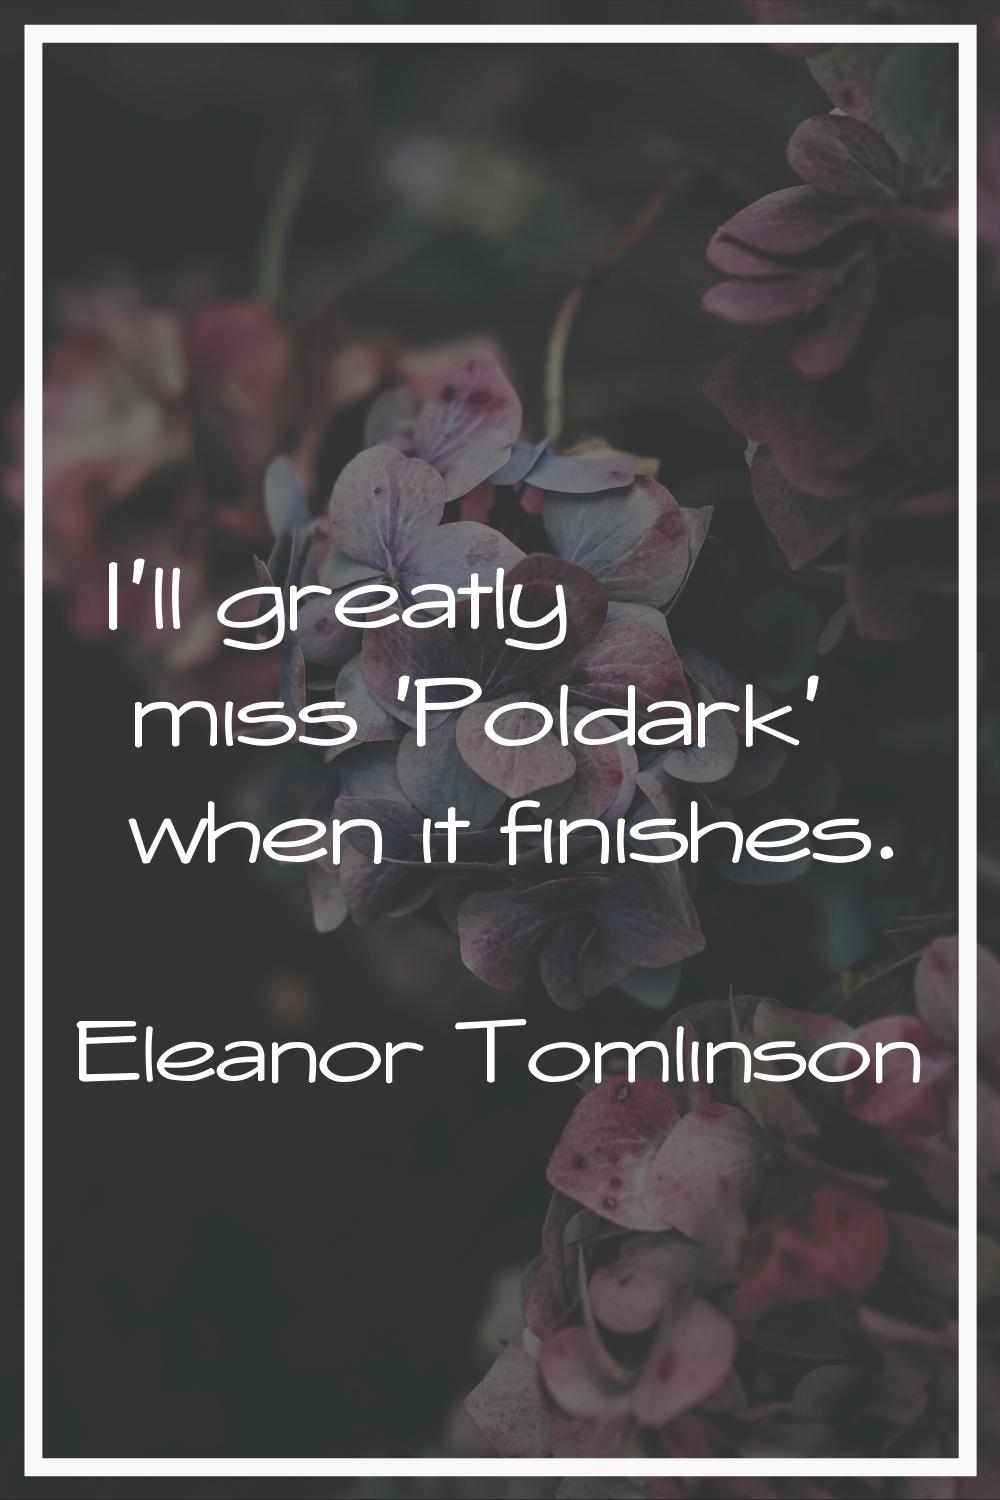 I'll greatly miss 'Poldark' when it finishes.